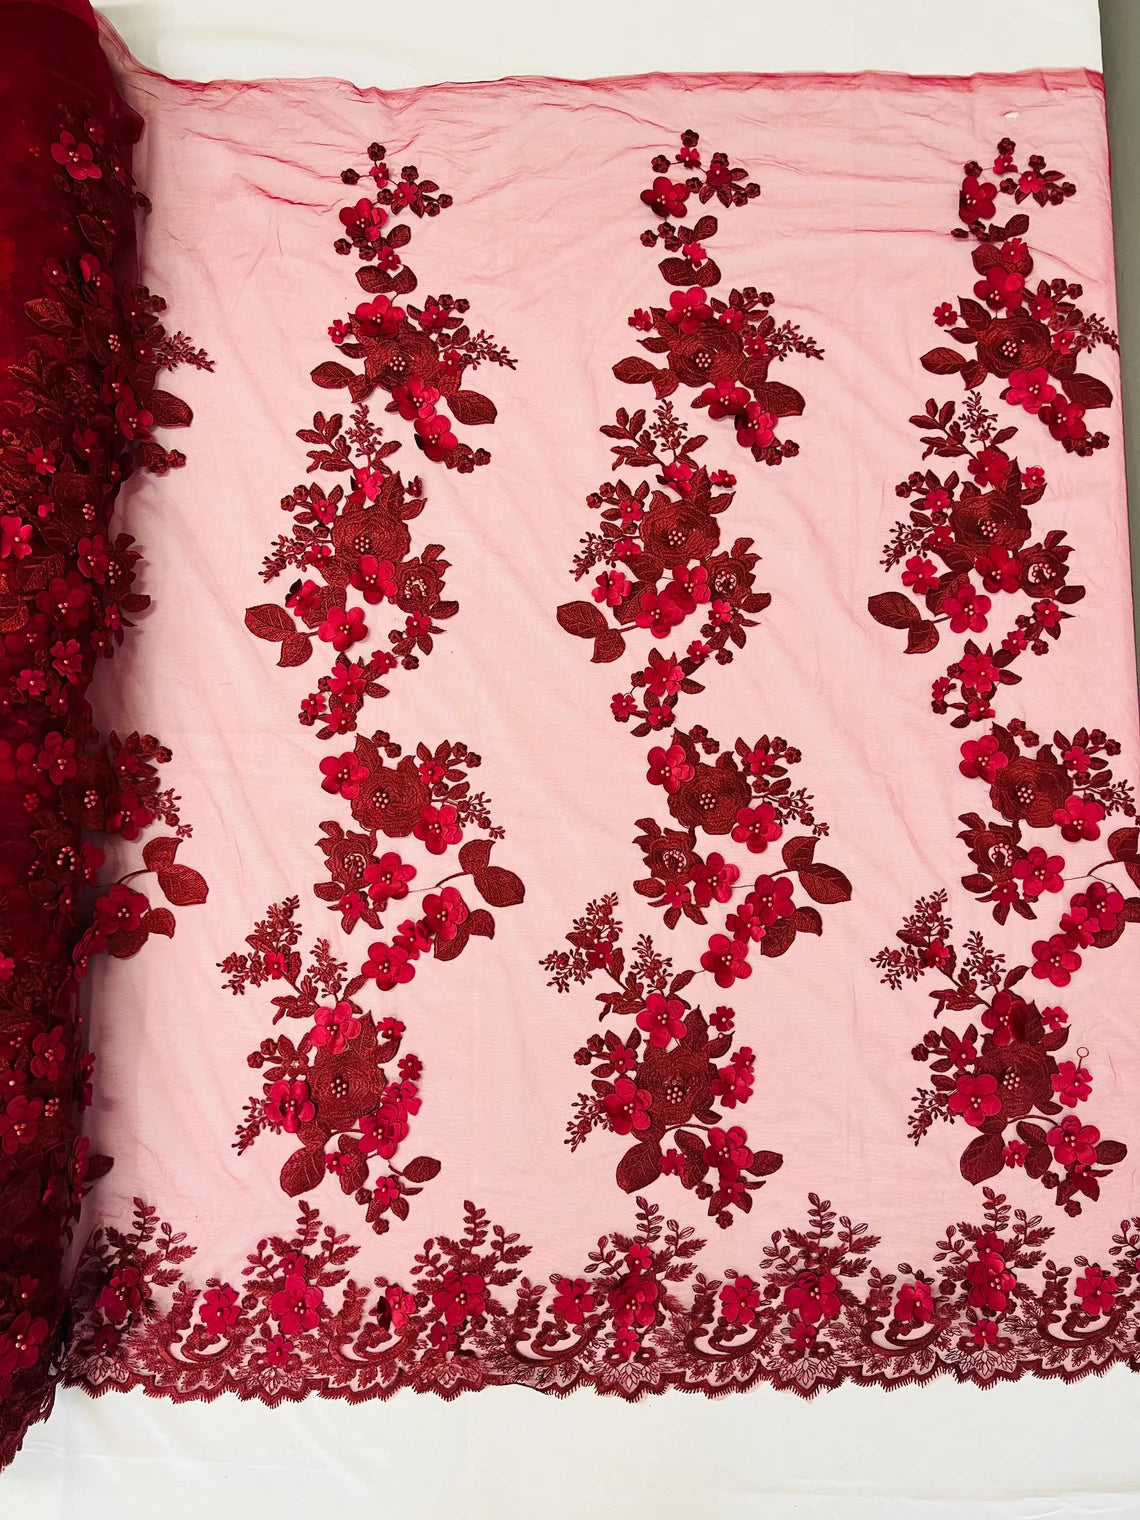 3D Flower Panels Fabric - Burgundy - Flower Panels Bead Embroidered on Lace Fabric Sold By Yard